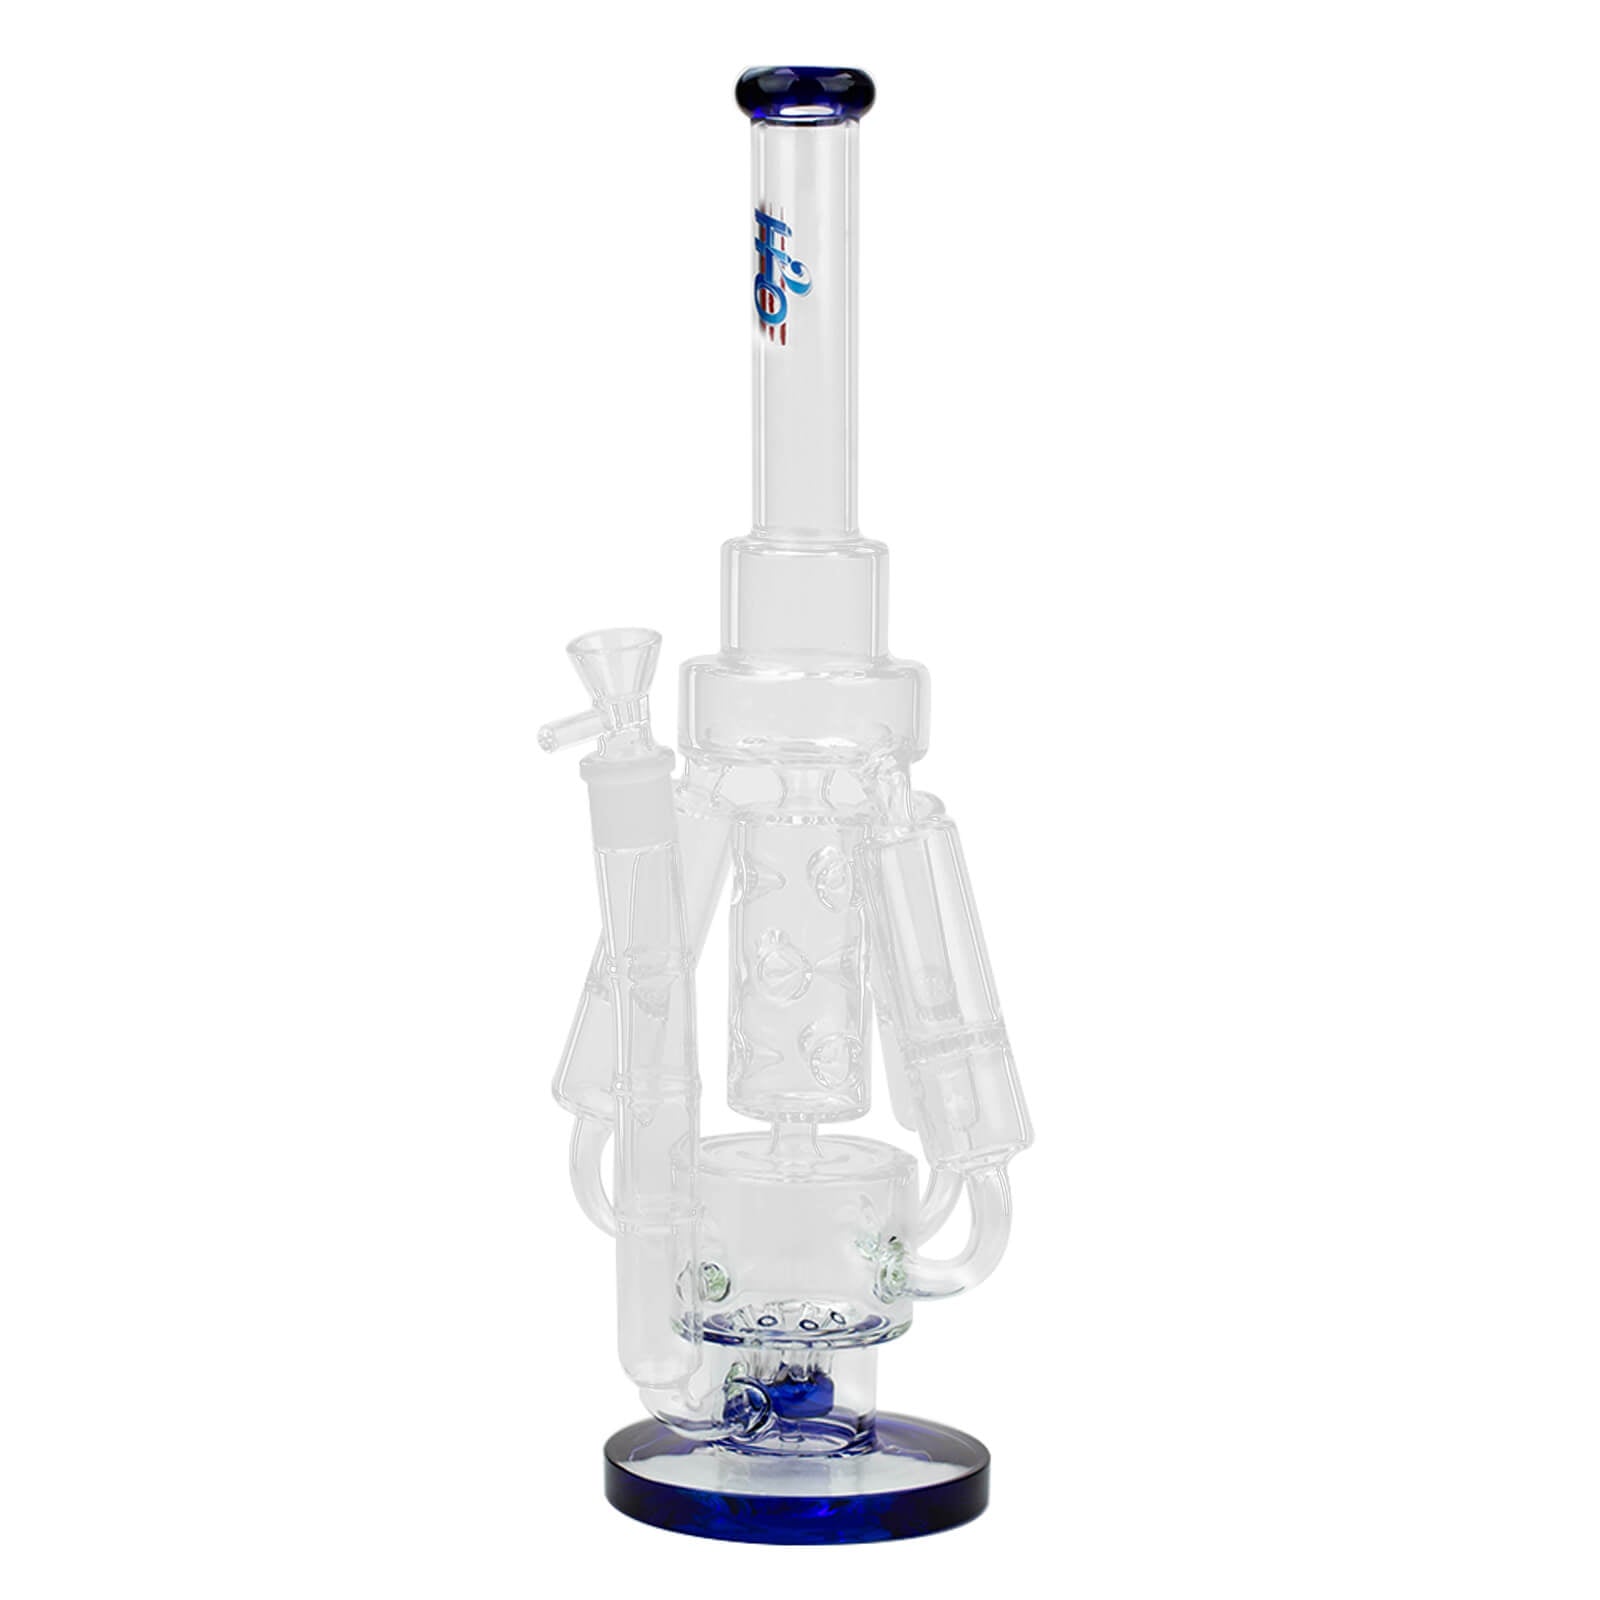 17" H2O Three Honeycomb Silnders Glass Water Recycle Bong